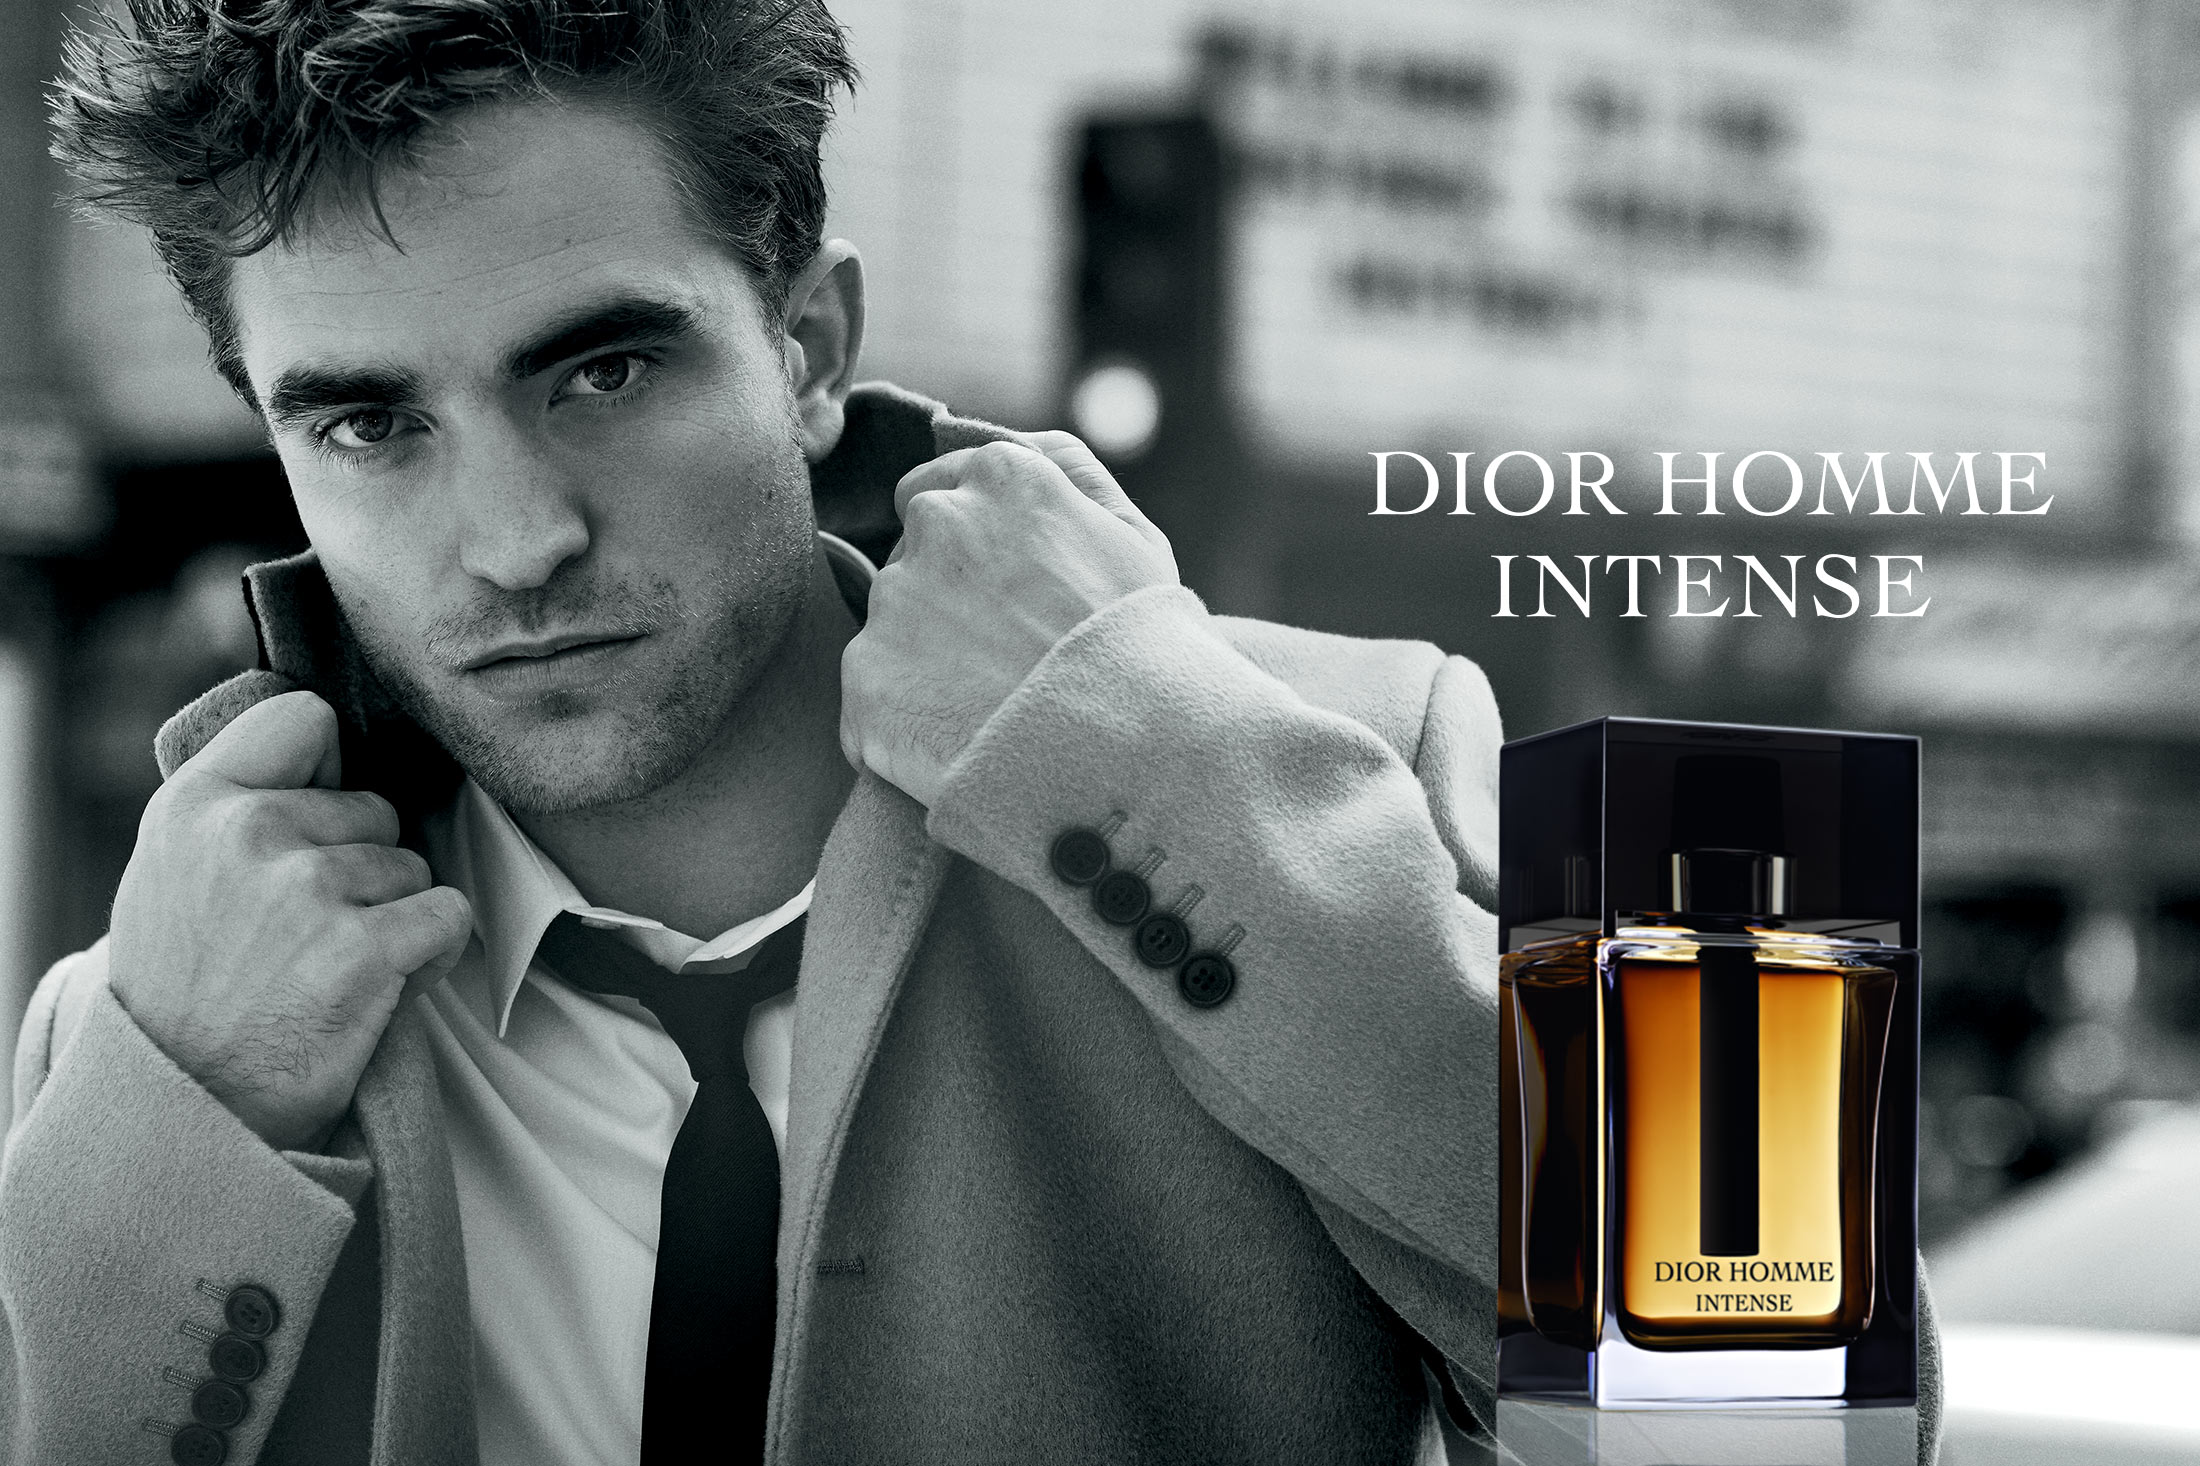 Dior on X: Discover the unforgettable sensual trail of Dior Homme